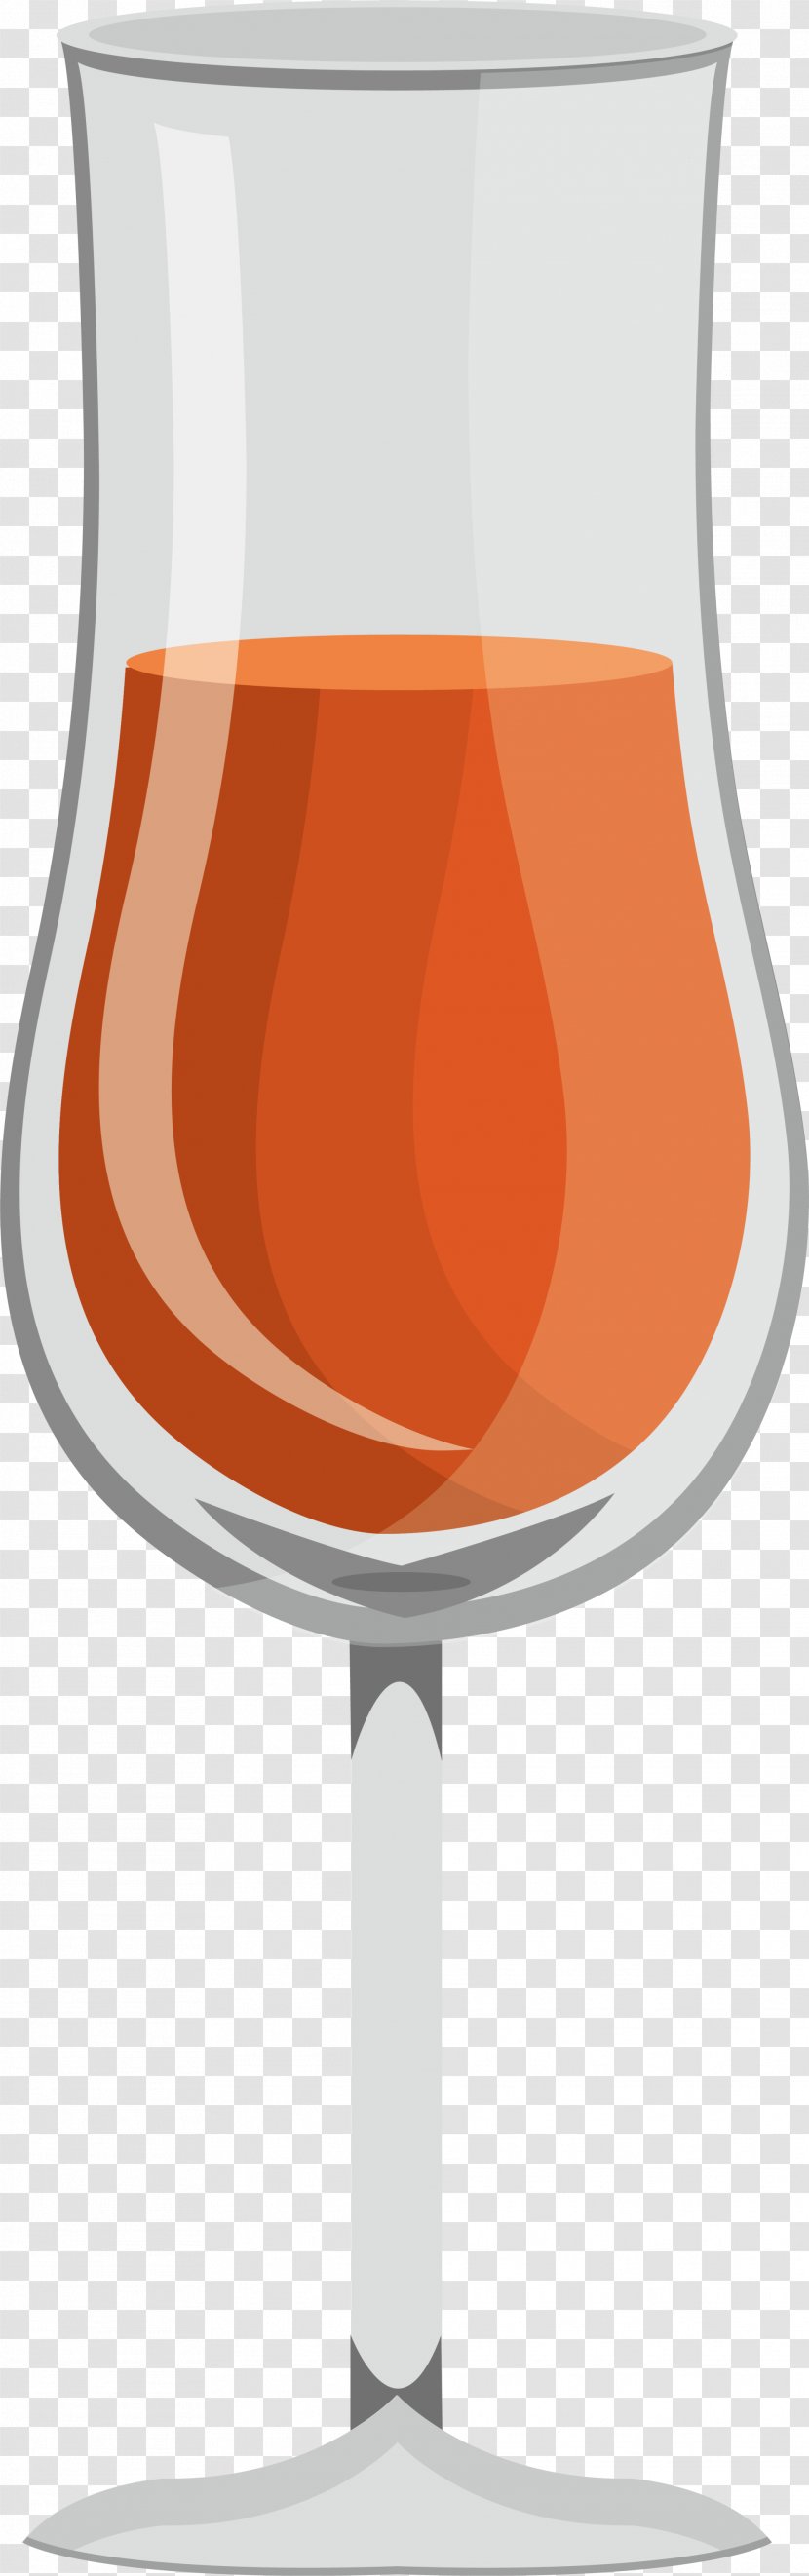 Wine Glass Cup - Orange Concise Transparent PNG